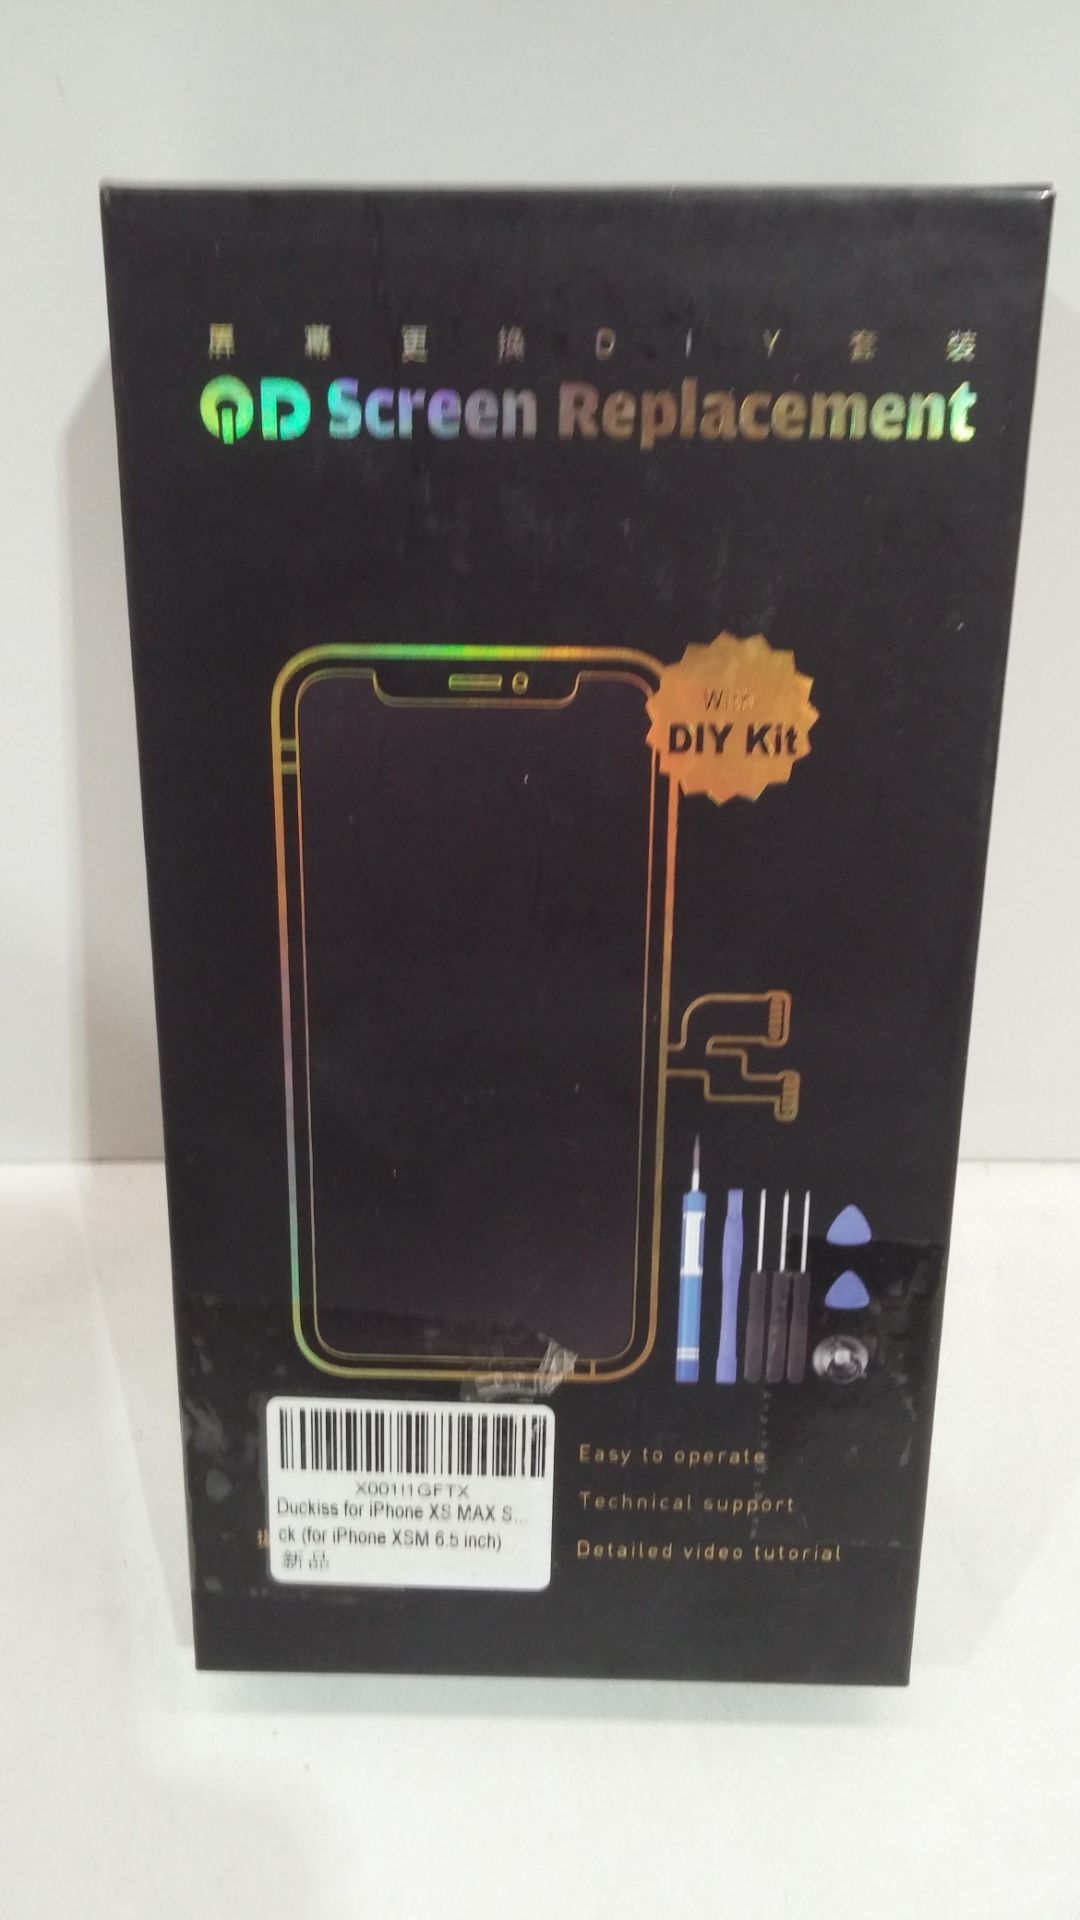 RRP £59.99 for iPhone XS MAX Screen Replacement 6.5 inch LCD Display - Image 2 of 2